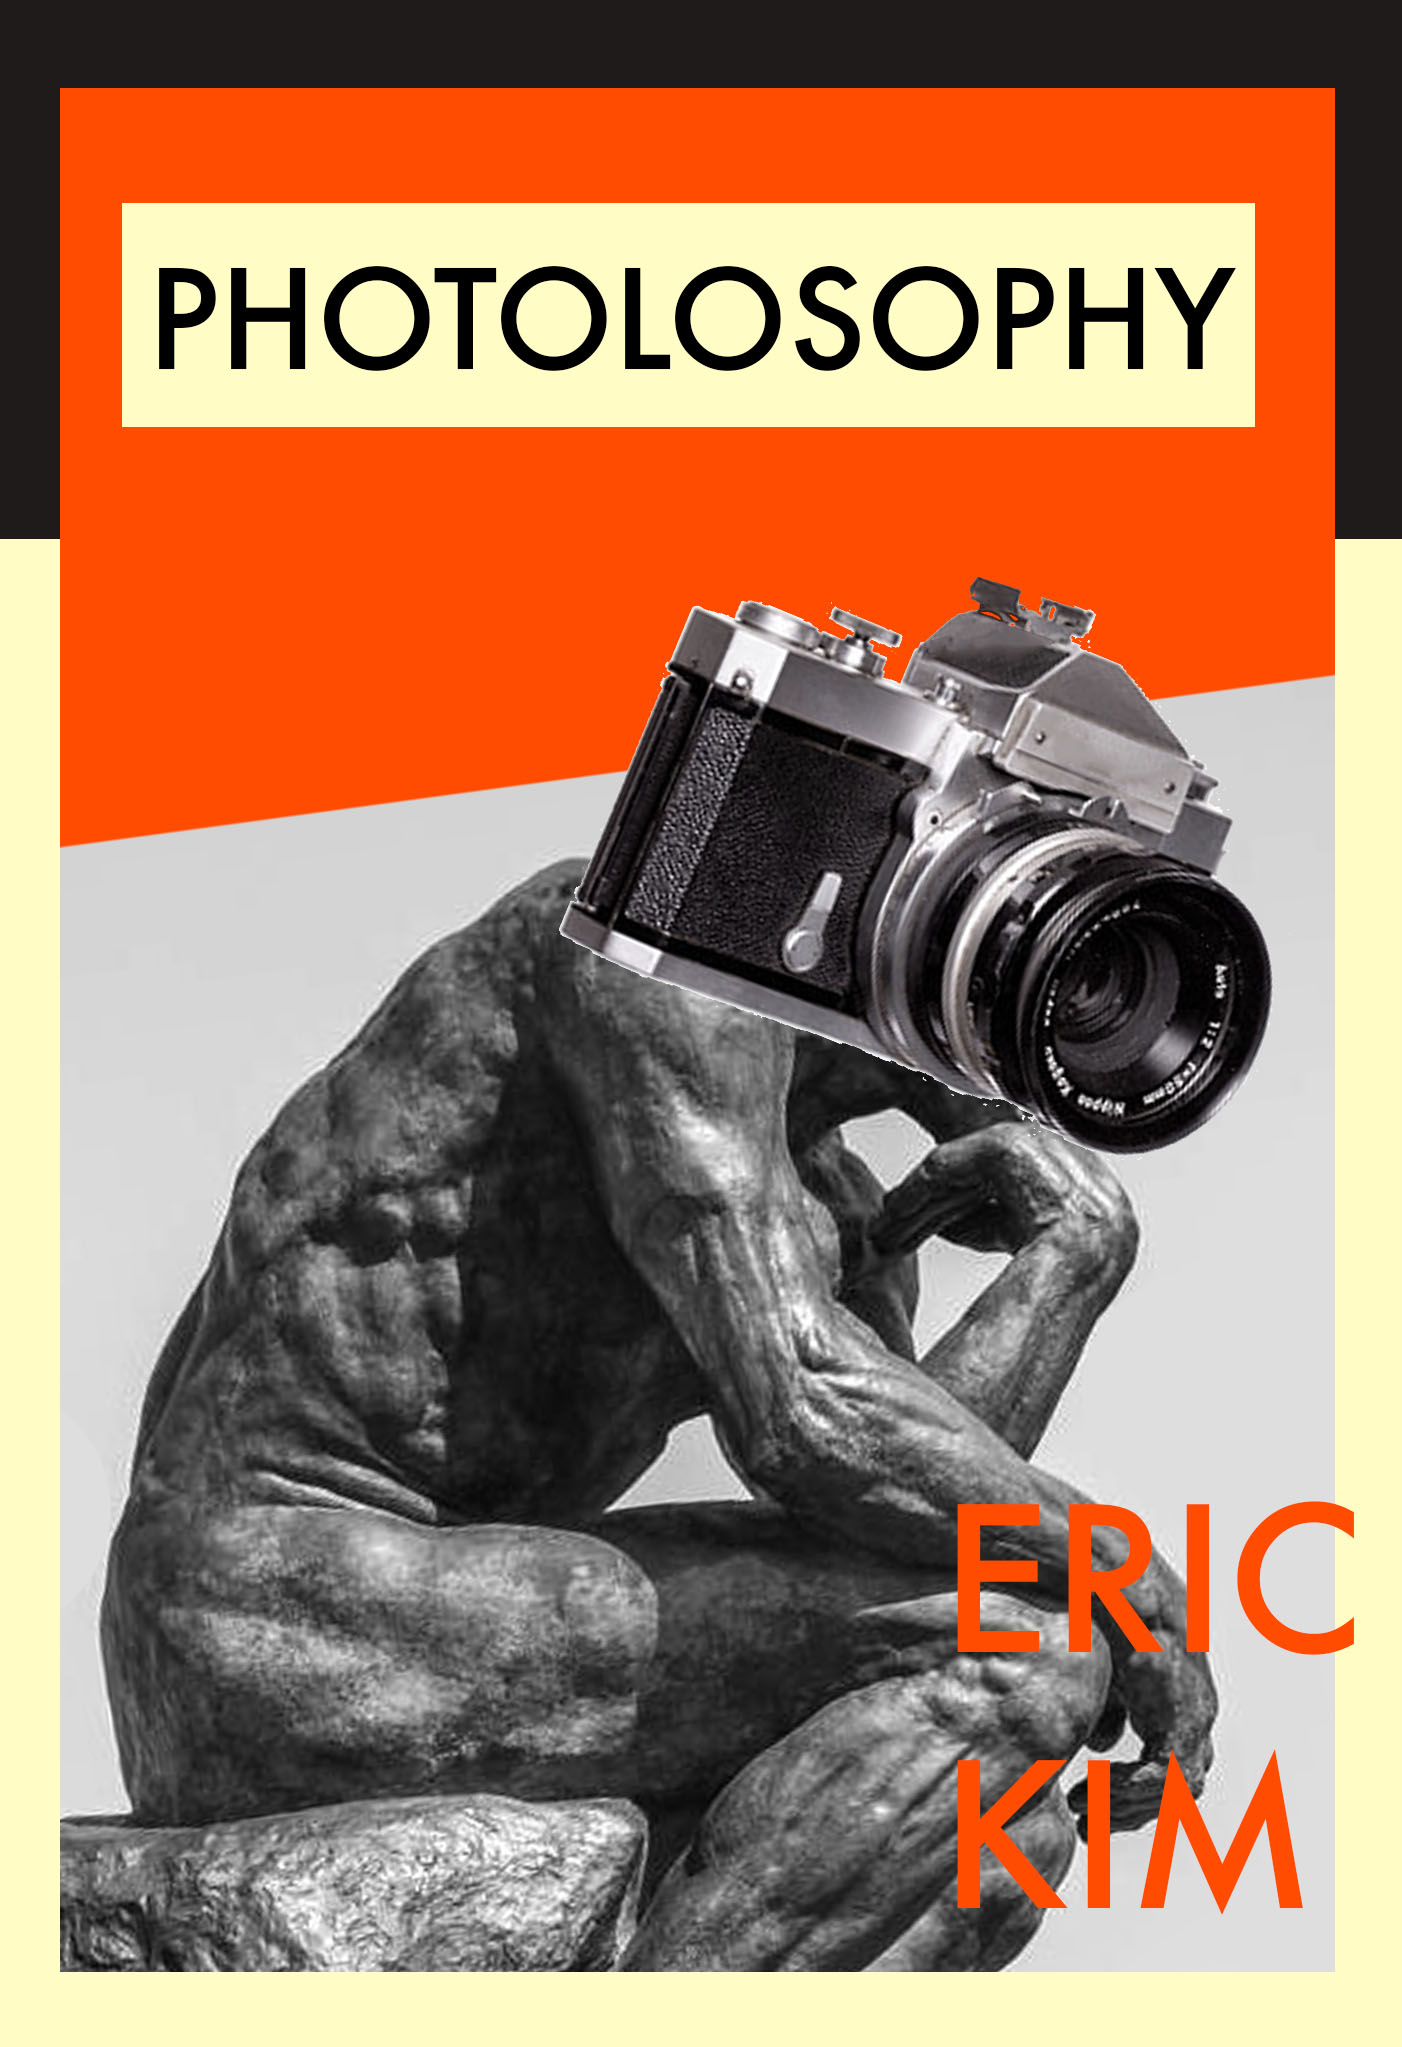 photolosophy-cover thinking man camera by Annette Kim ERIC KIM